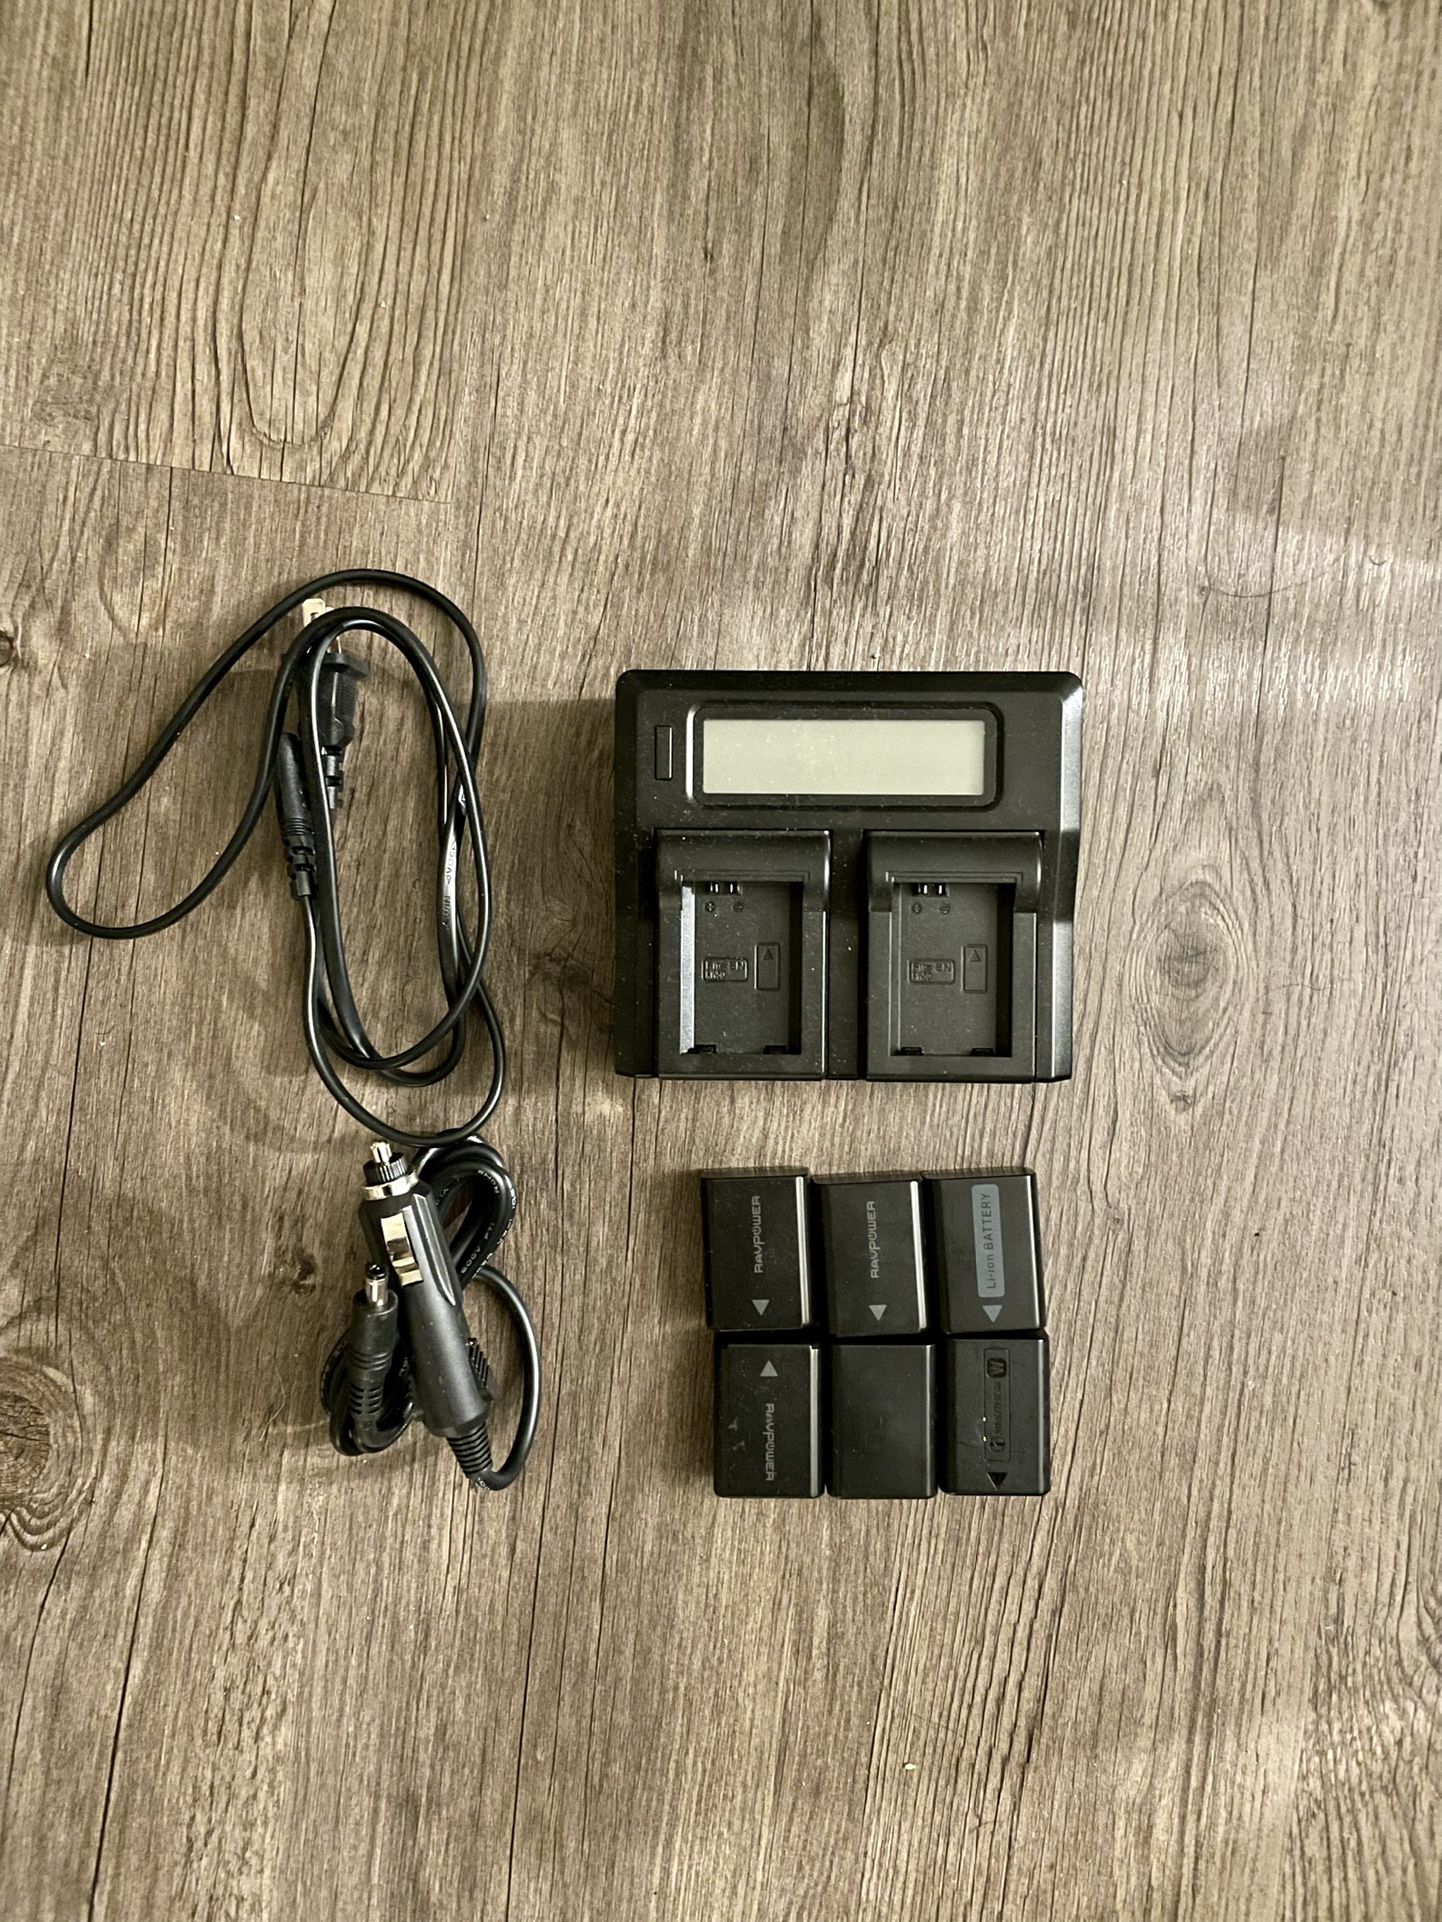 Sony FW-550 Batteries & Charger